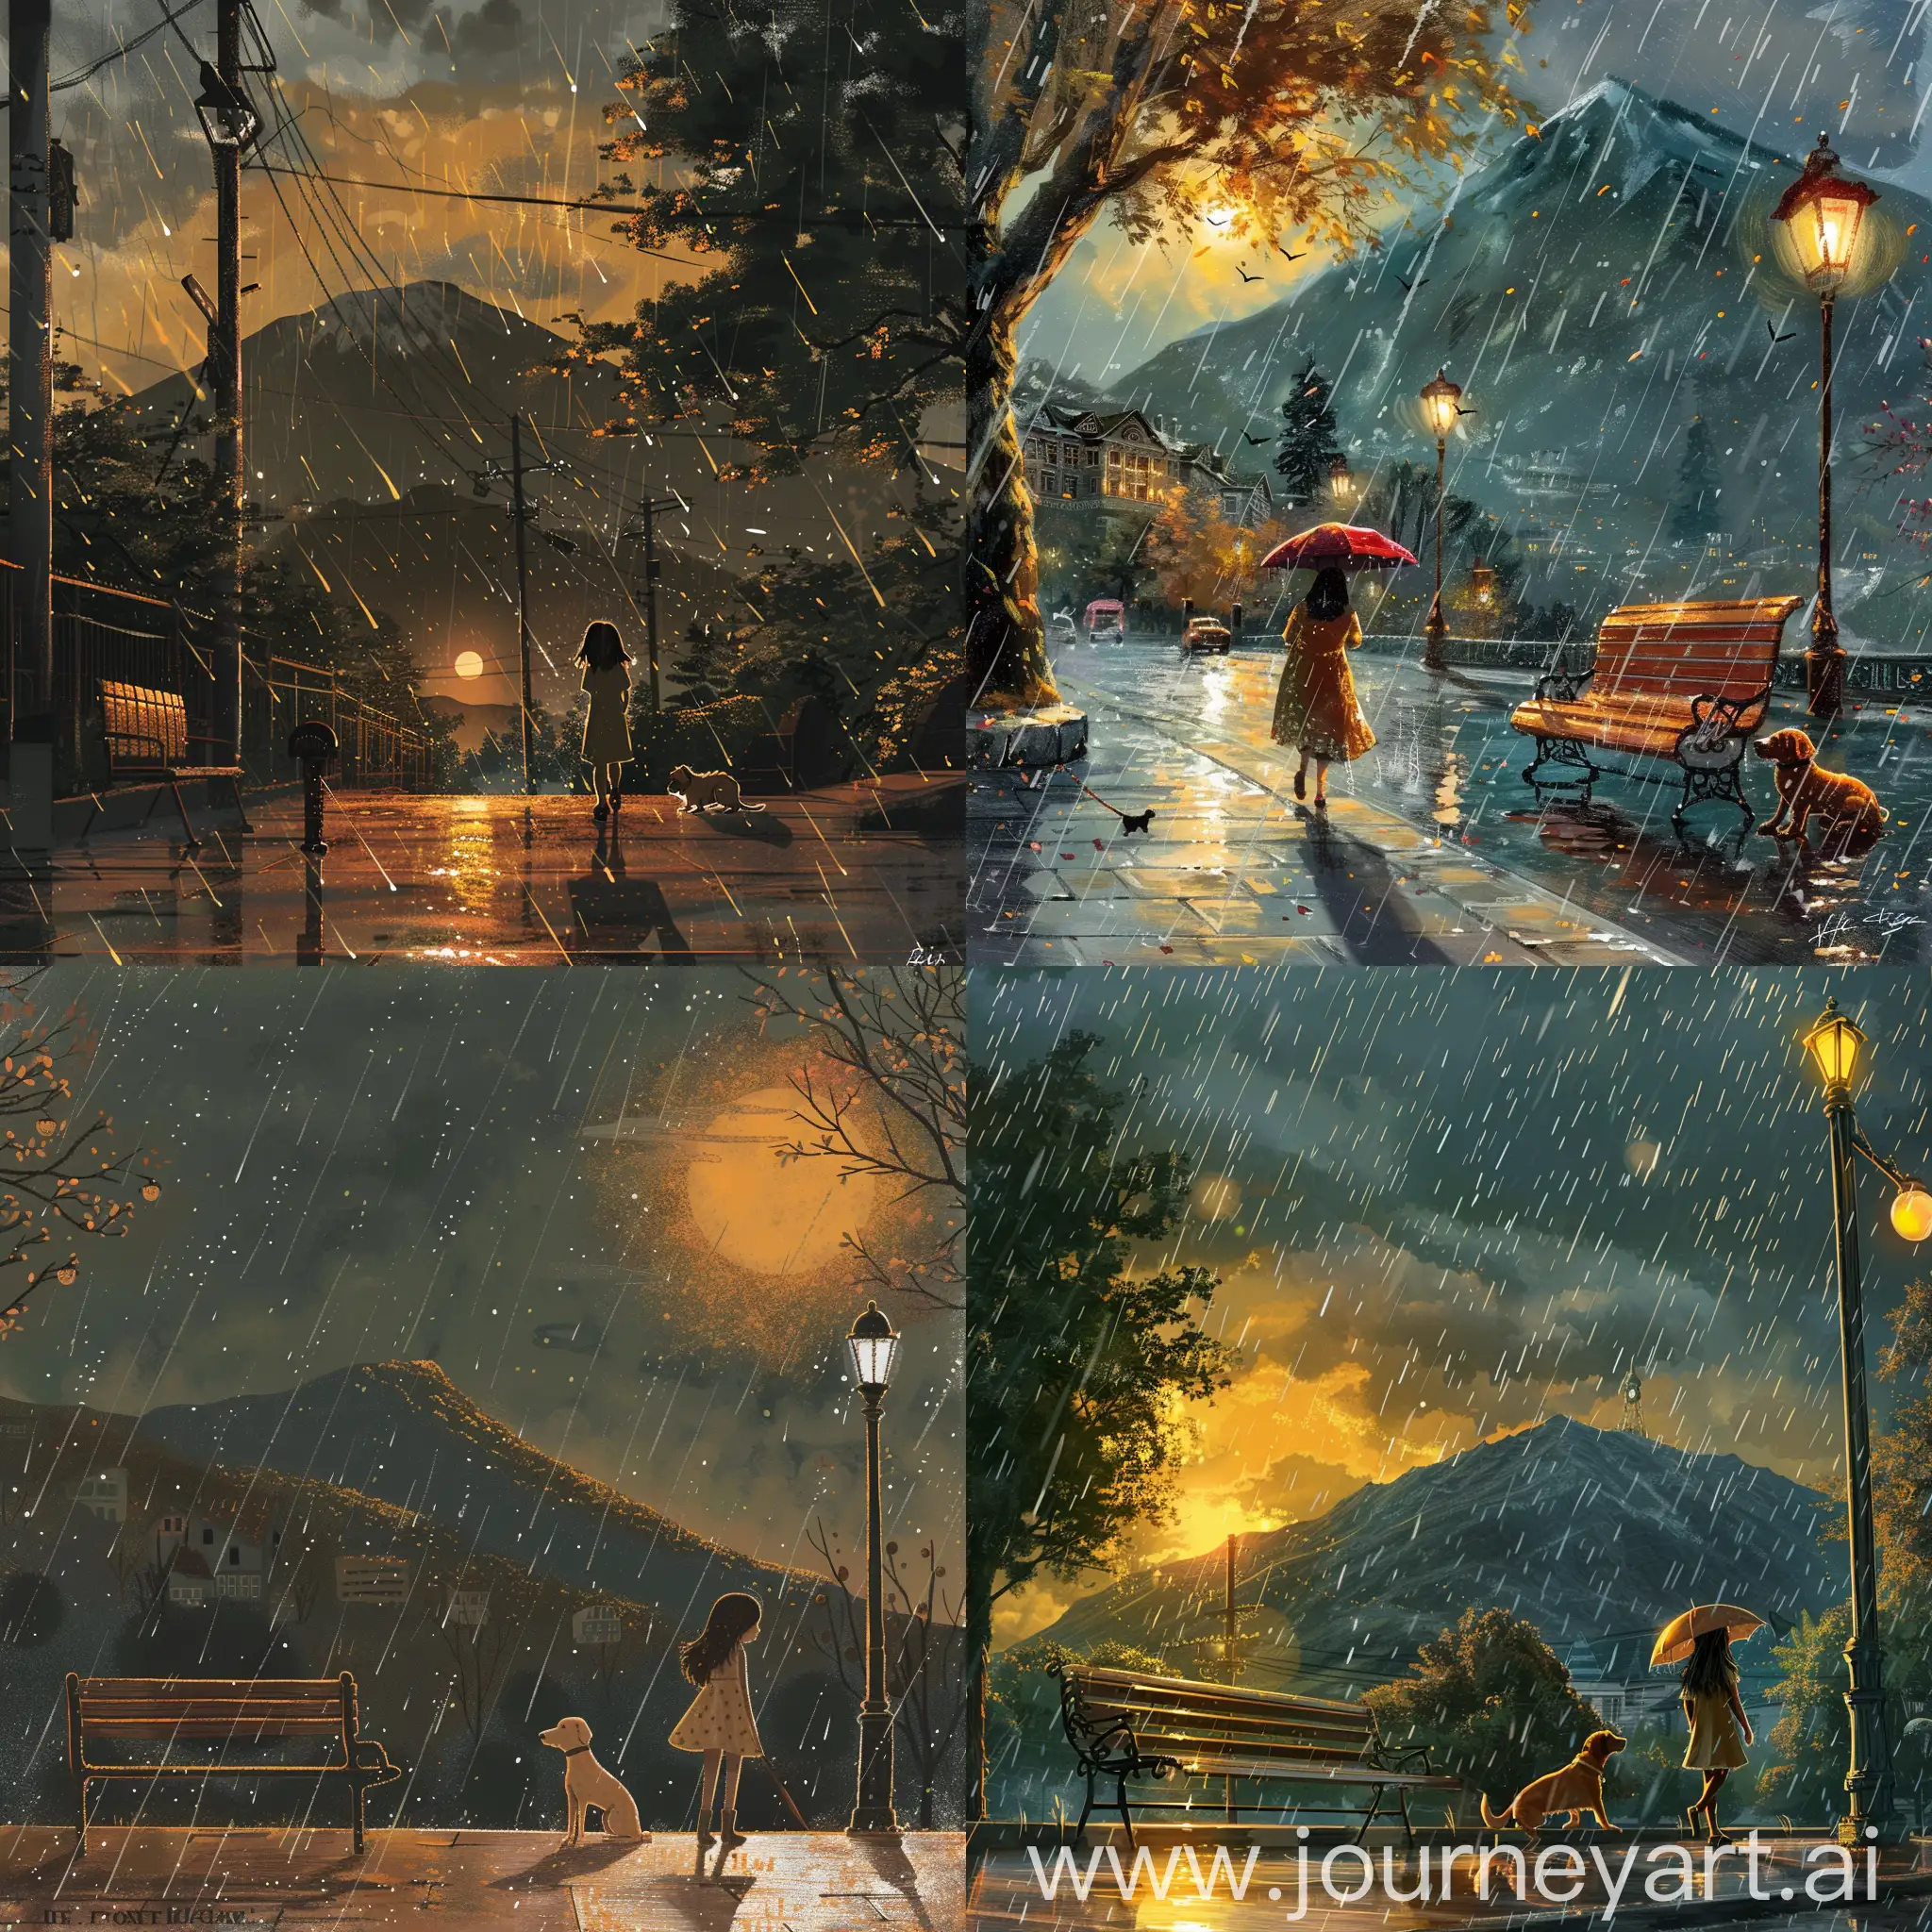 Girl-Walking-in-Rainy-Sunset-with-Dog-on-Boulevard-Bench